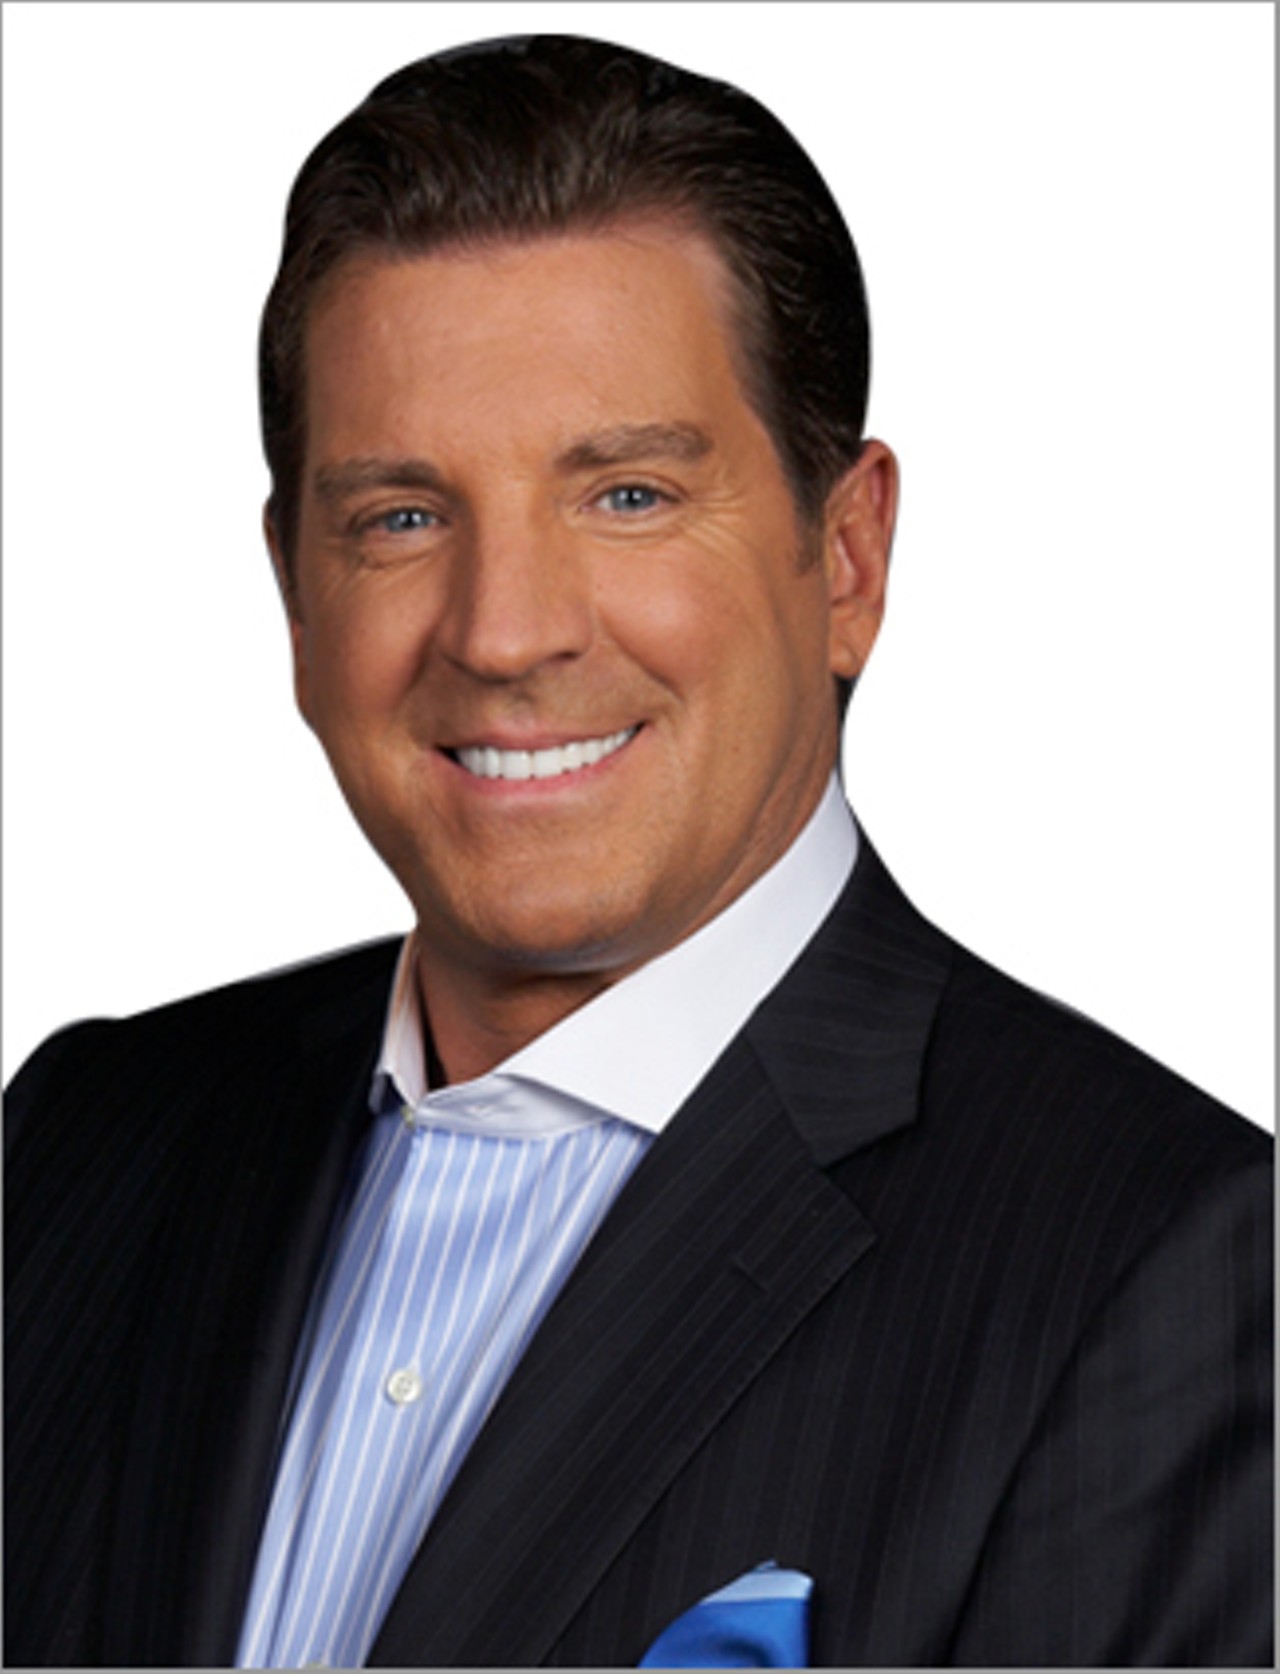 Eric Bolling- A conservative television personality, co-host of The Five on Fox News.